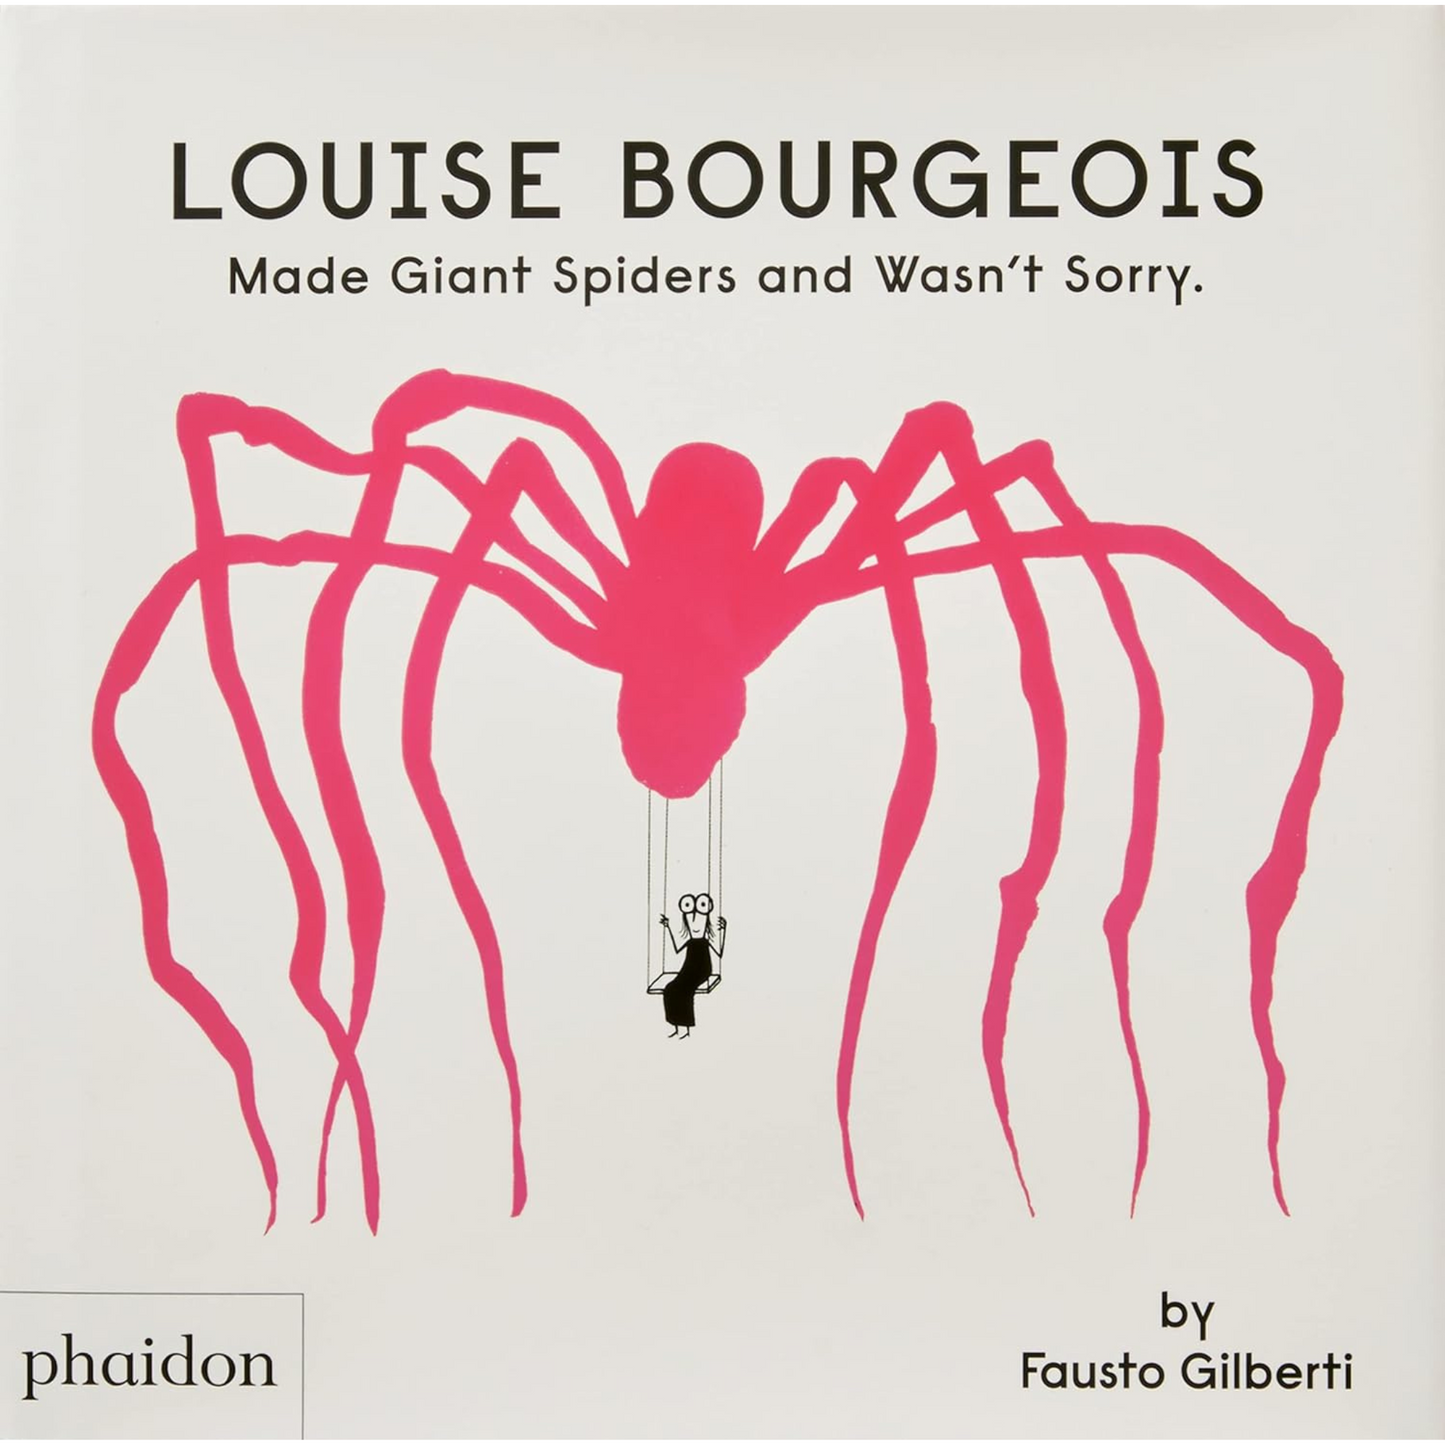 Load image into Gallery viewer, Cover with cartoony illustration of Louise Bourgeois on a swing below one of her big spider sculptures.
